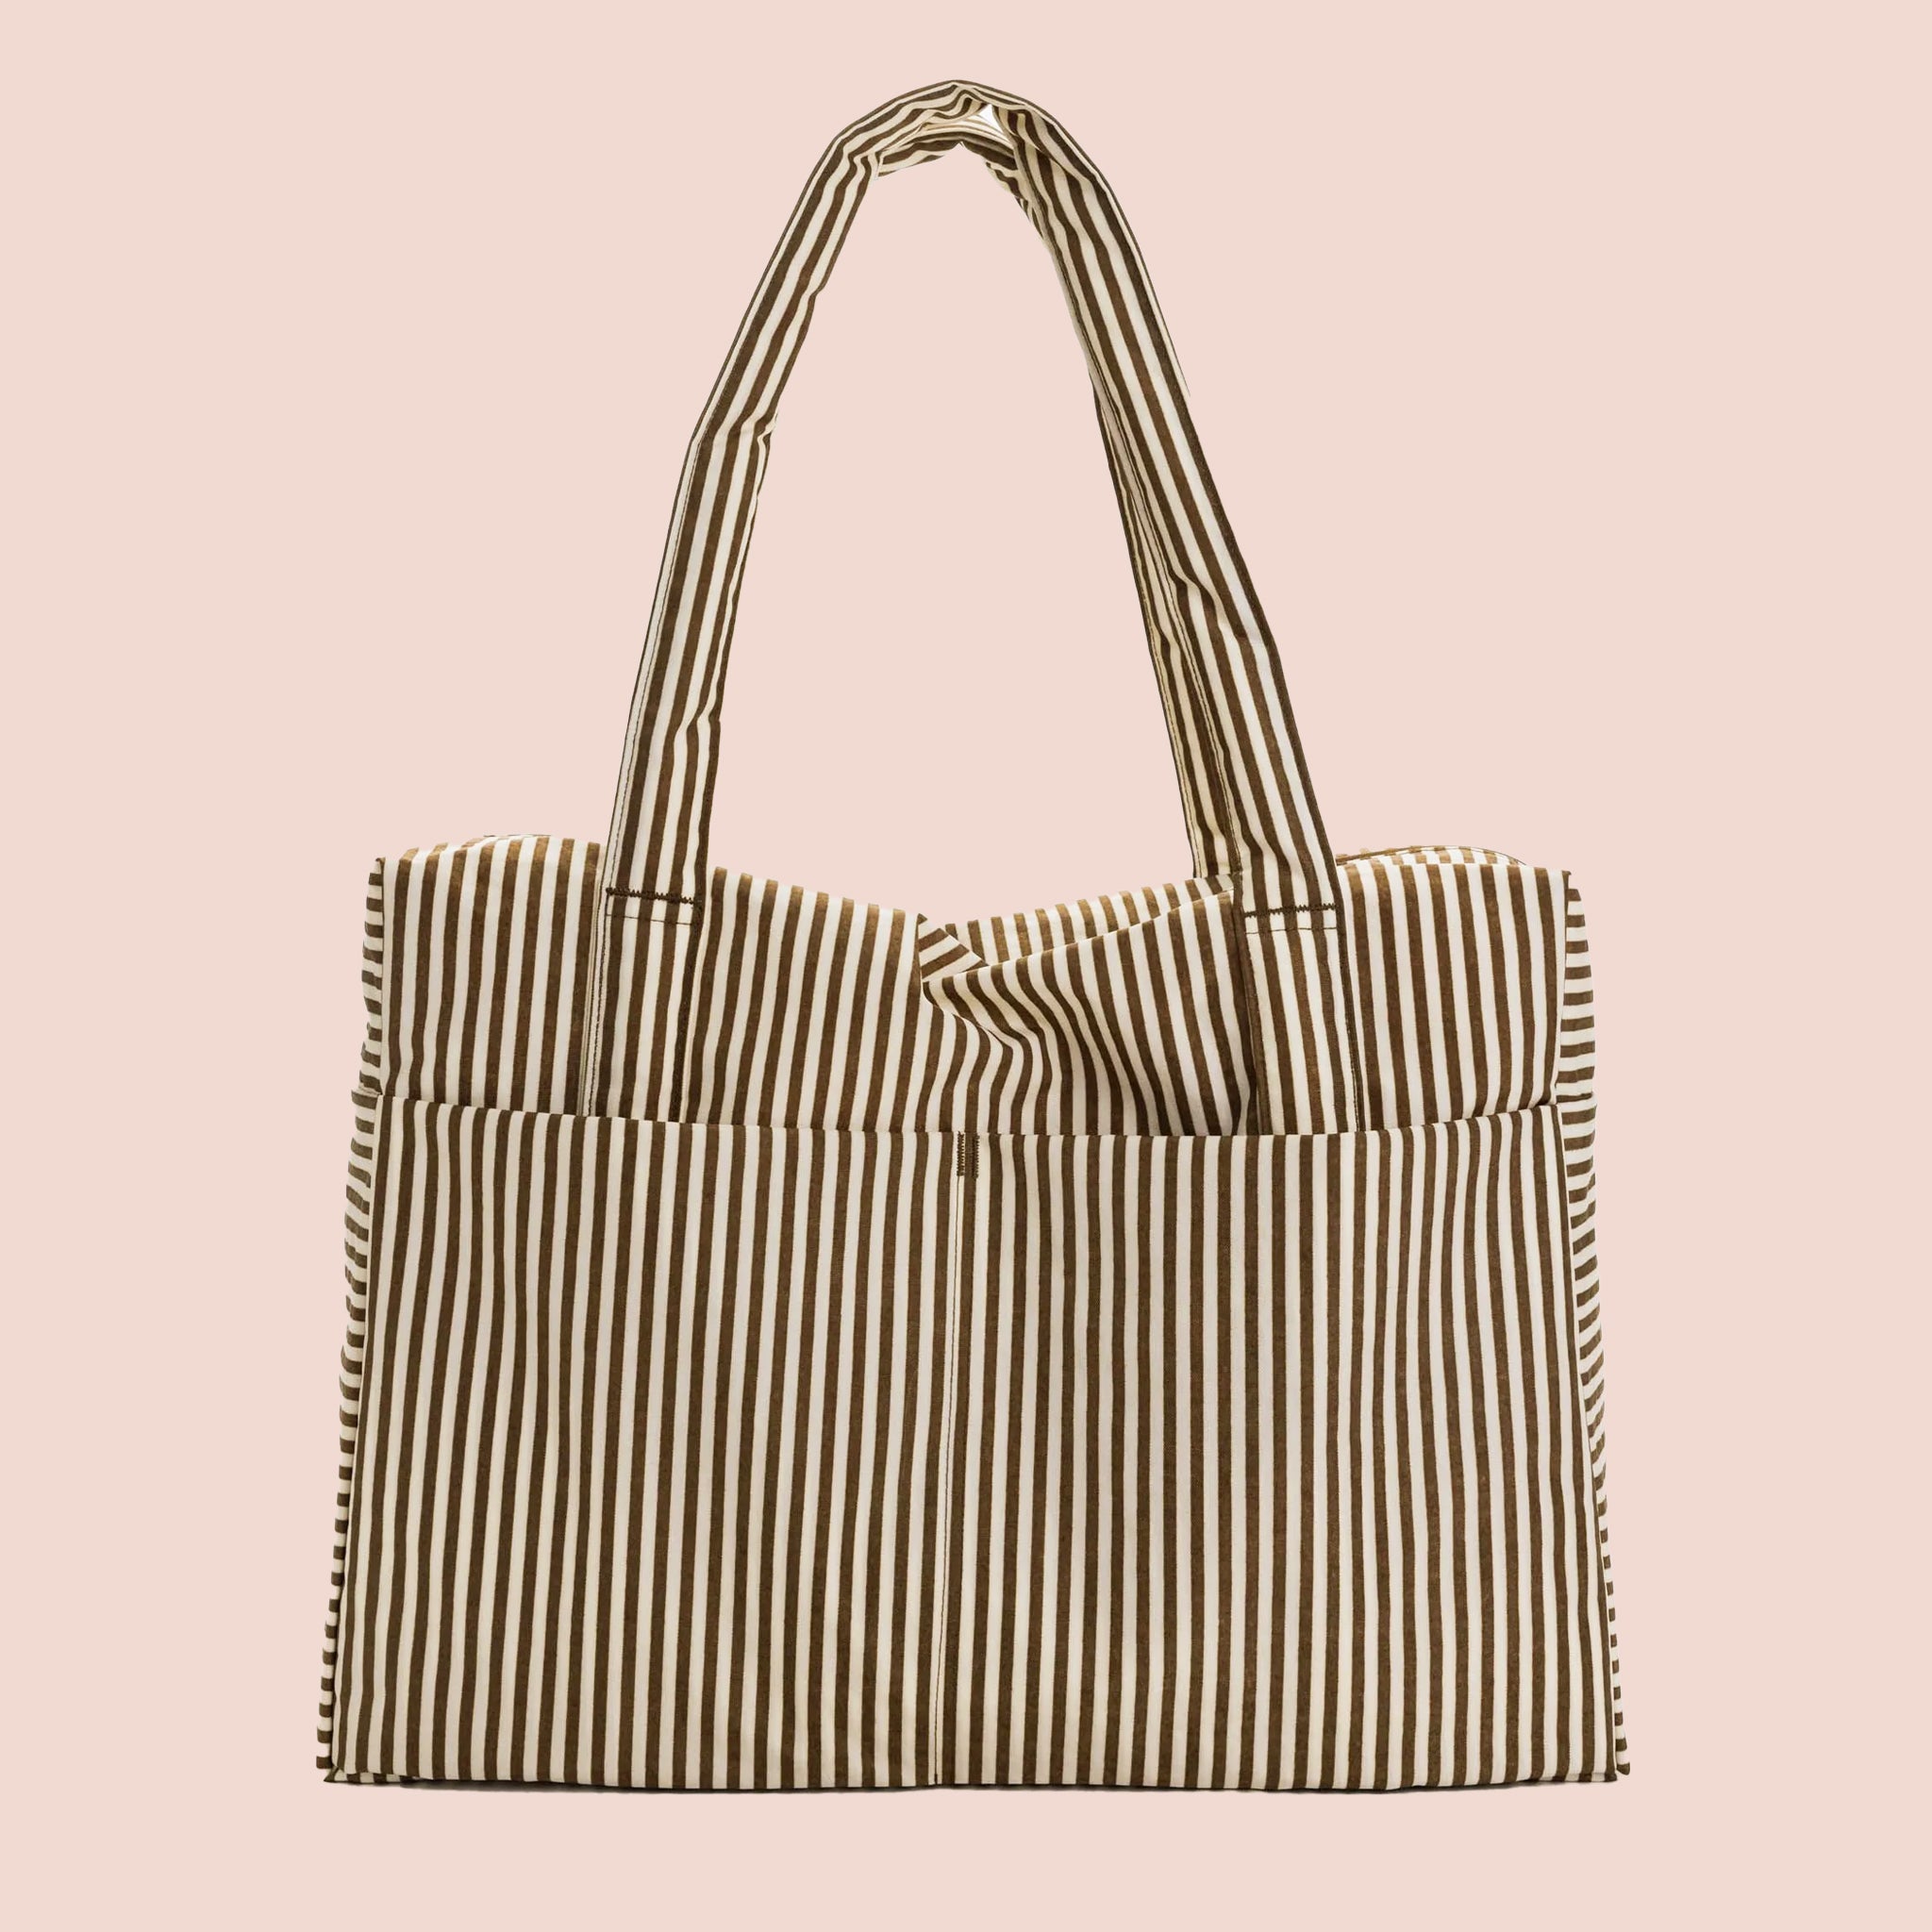 On a light pink background is a brown and white striped travel bag tote.